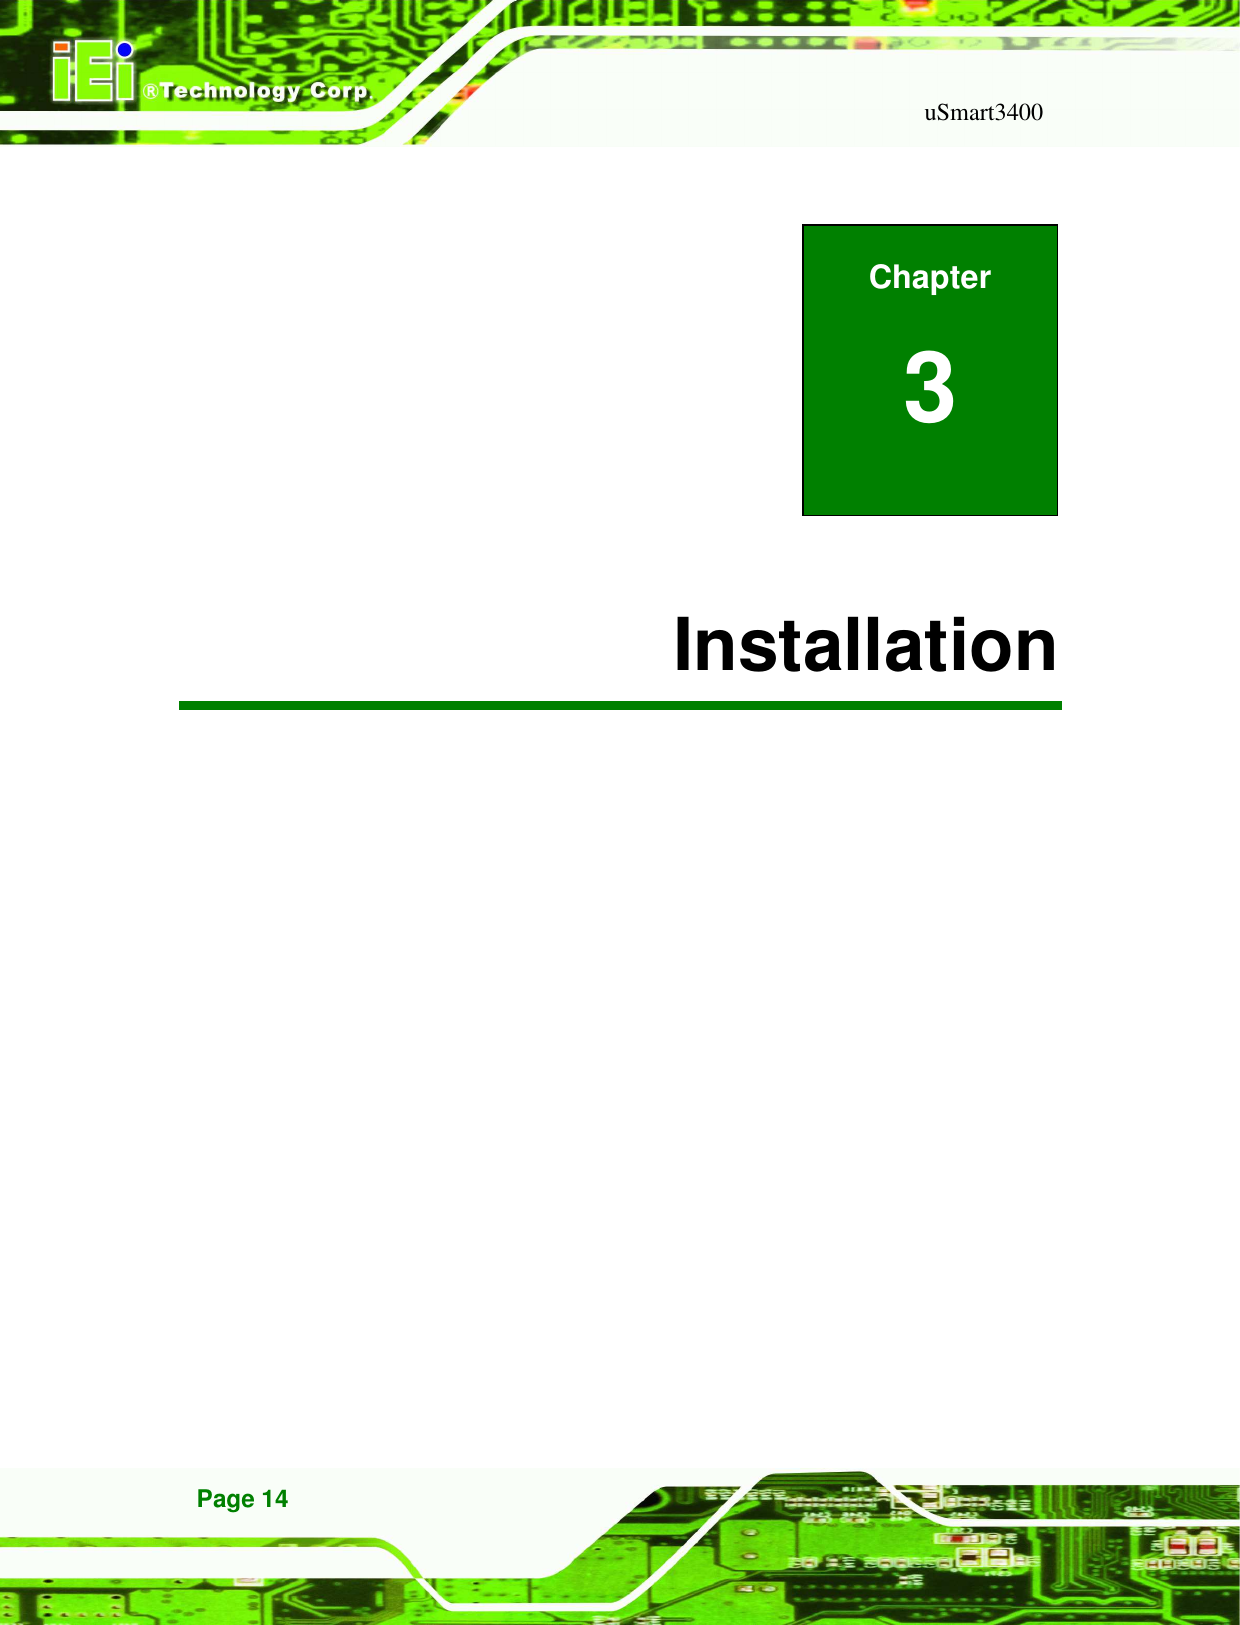   uSmart3400 Page 14            3 Installation  Chapter 3 